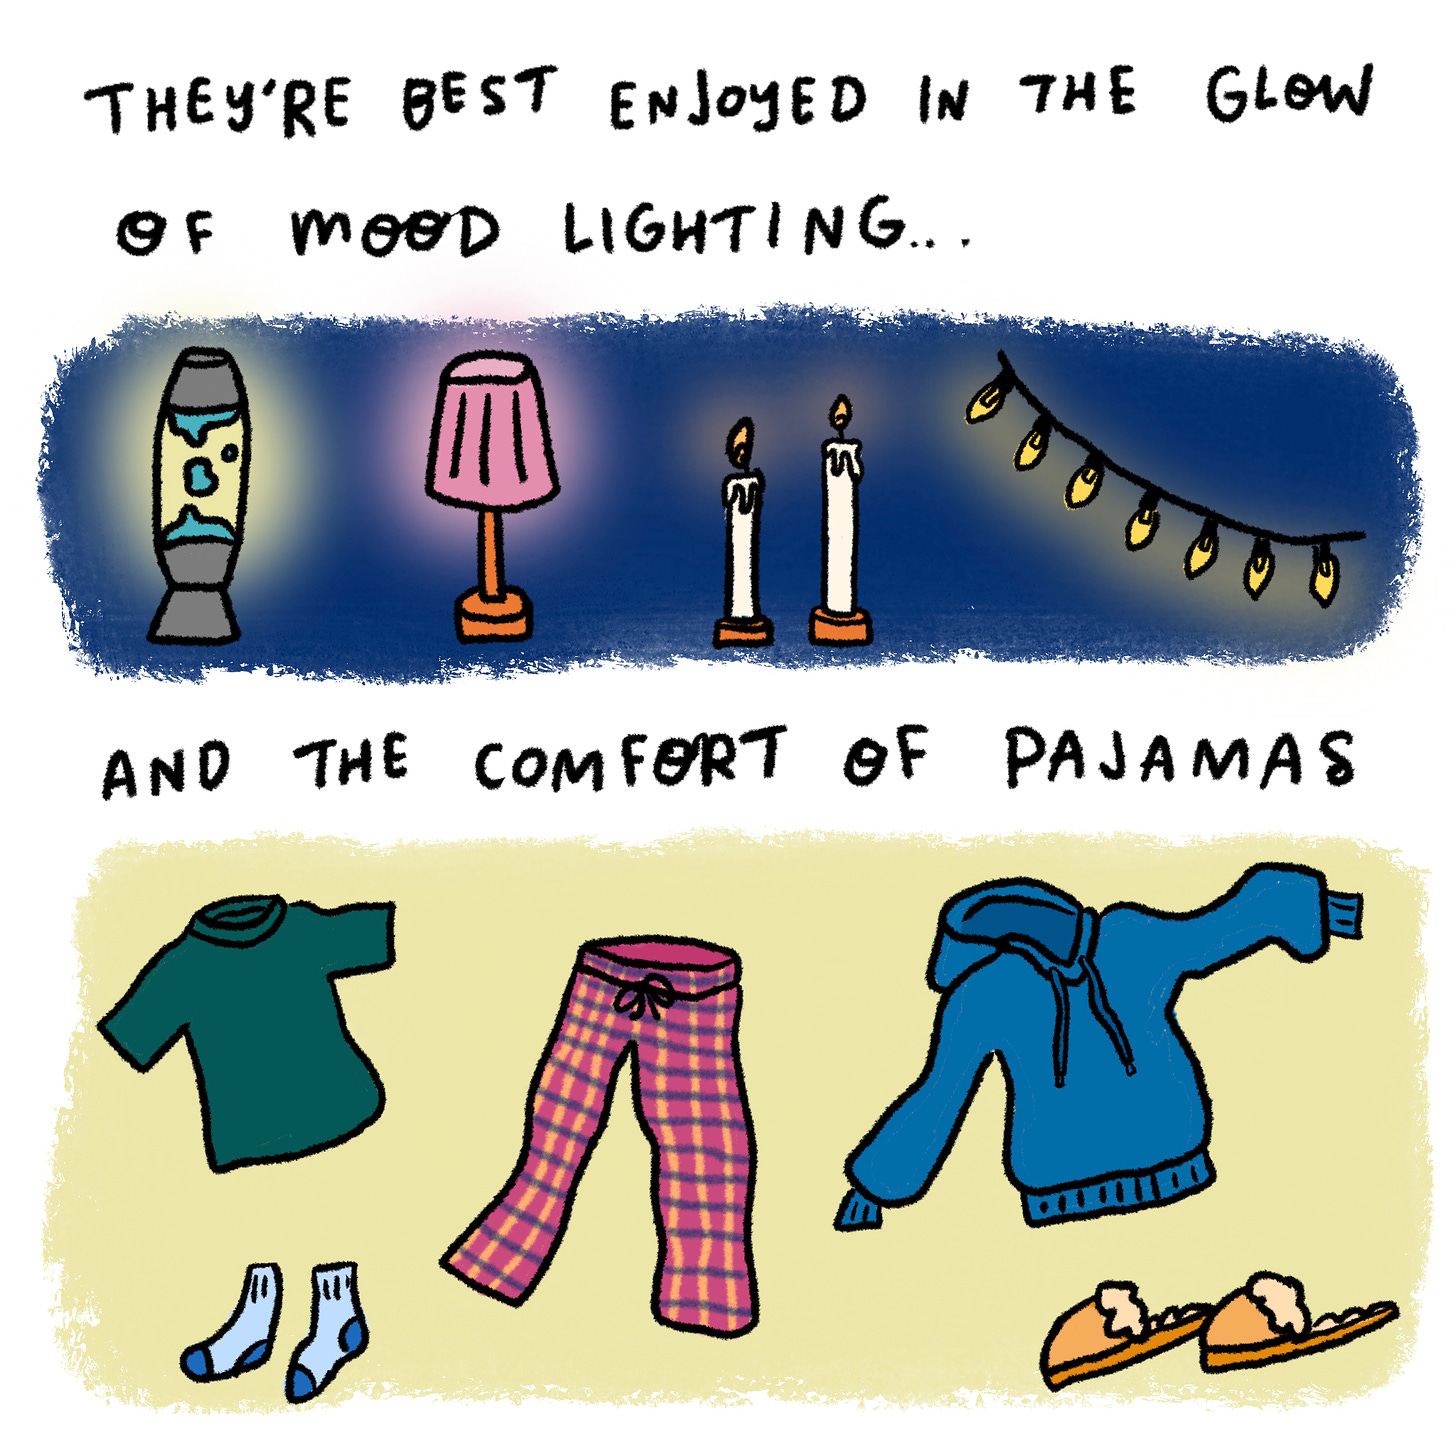 They’re best enjoyed in the glow of mood lighting and the comfort of pajamas